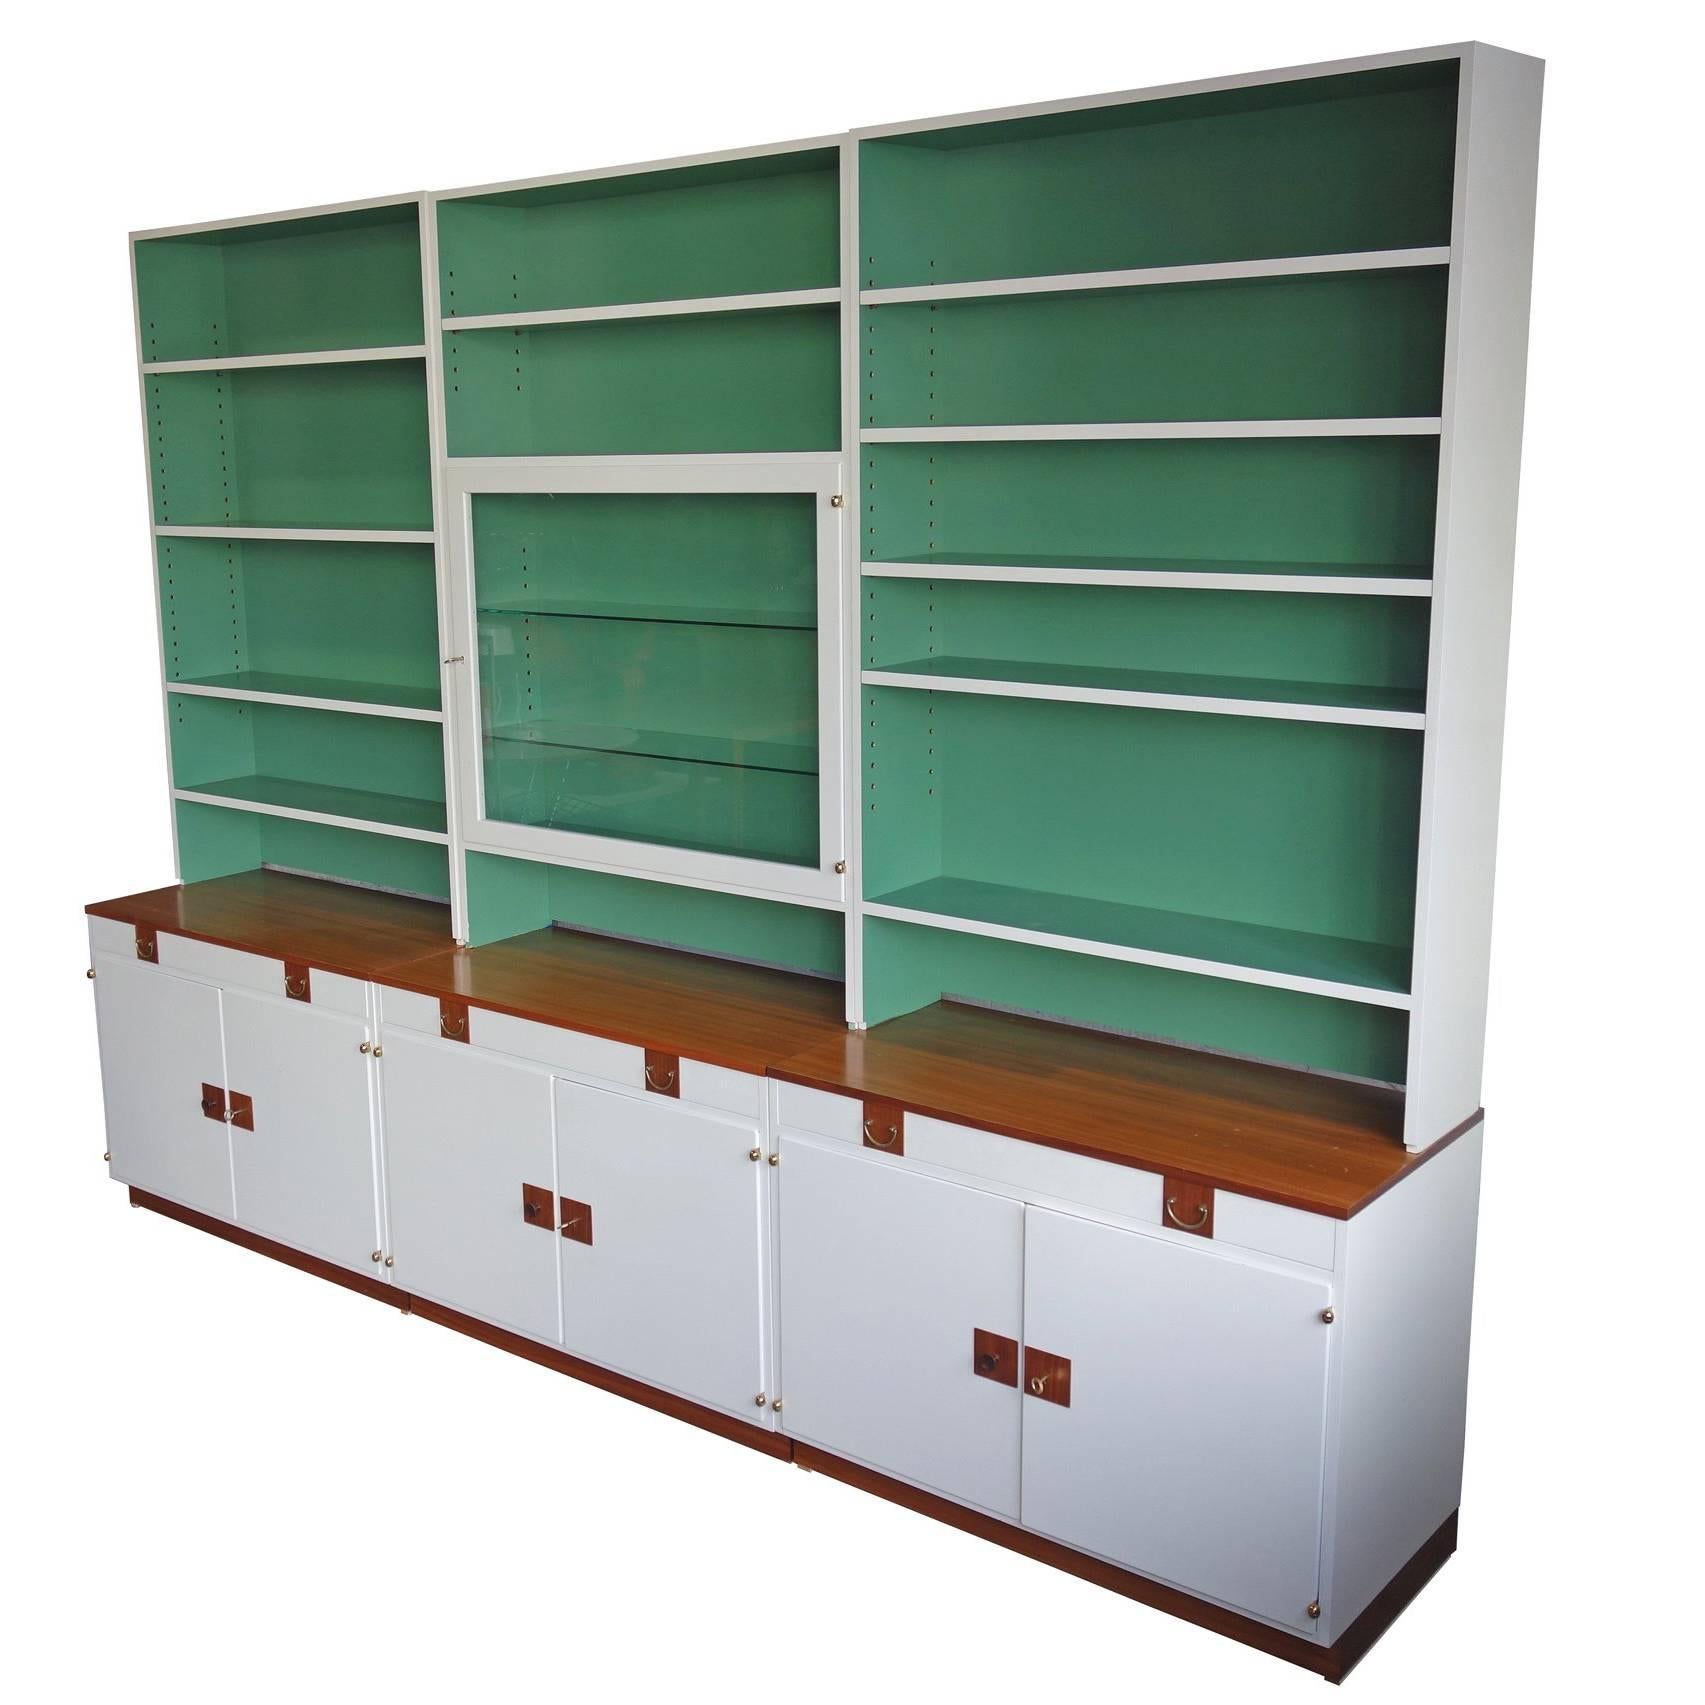 Rarely seen three section wall unit by Josef Frank.

 Featuring two-toned wood pulls with keyed cabinets. White lacquered on a green base and fittings in walnut. The bookcase comes with adjustable shelves and the glass cabinet with two separate